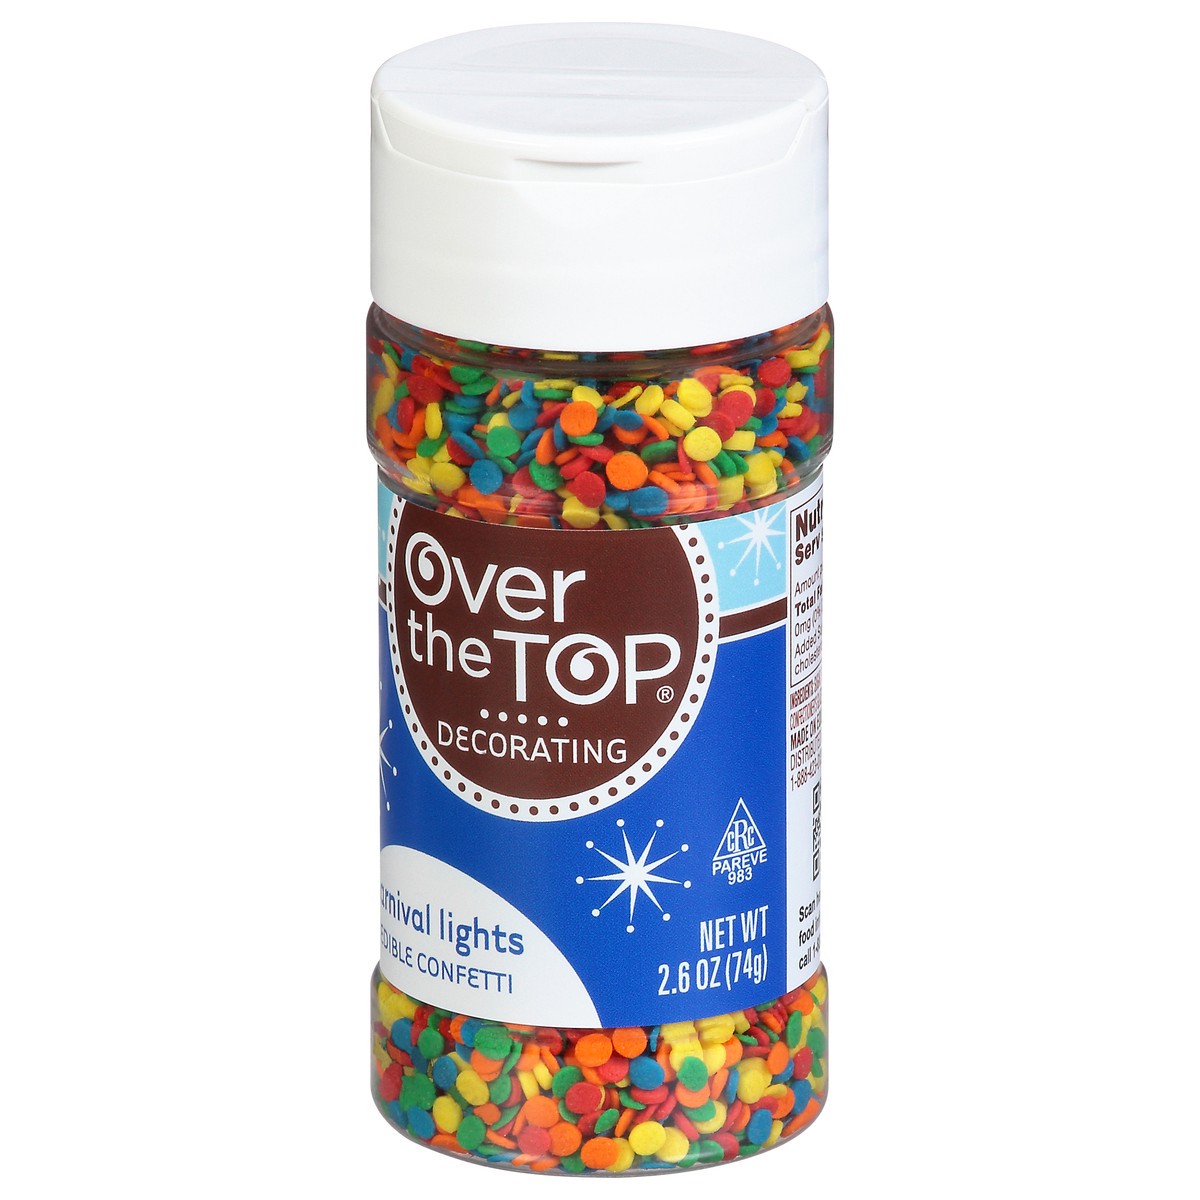 slide 3 of 9, Over The Top Decorating Carnival Lights Edible Confetti 2.6 oz, 2.6 oz